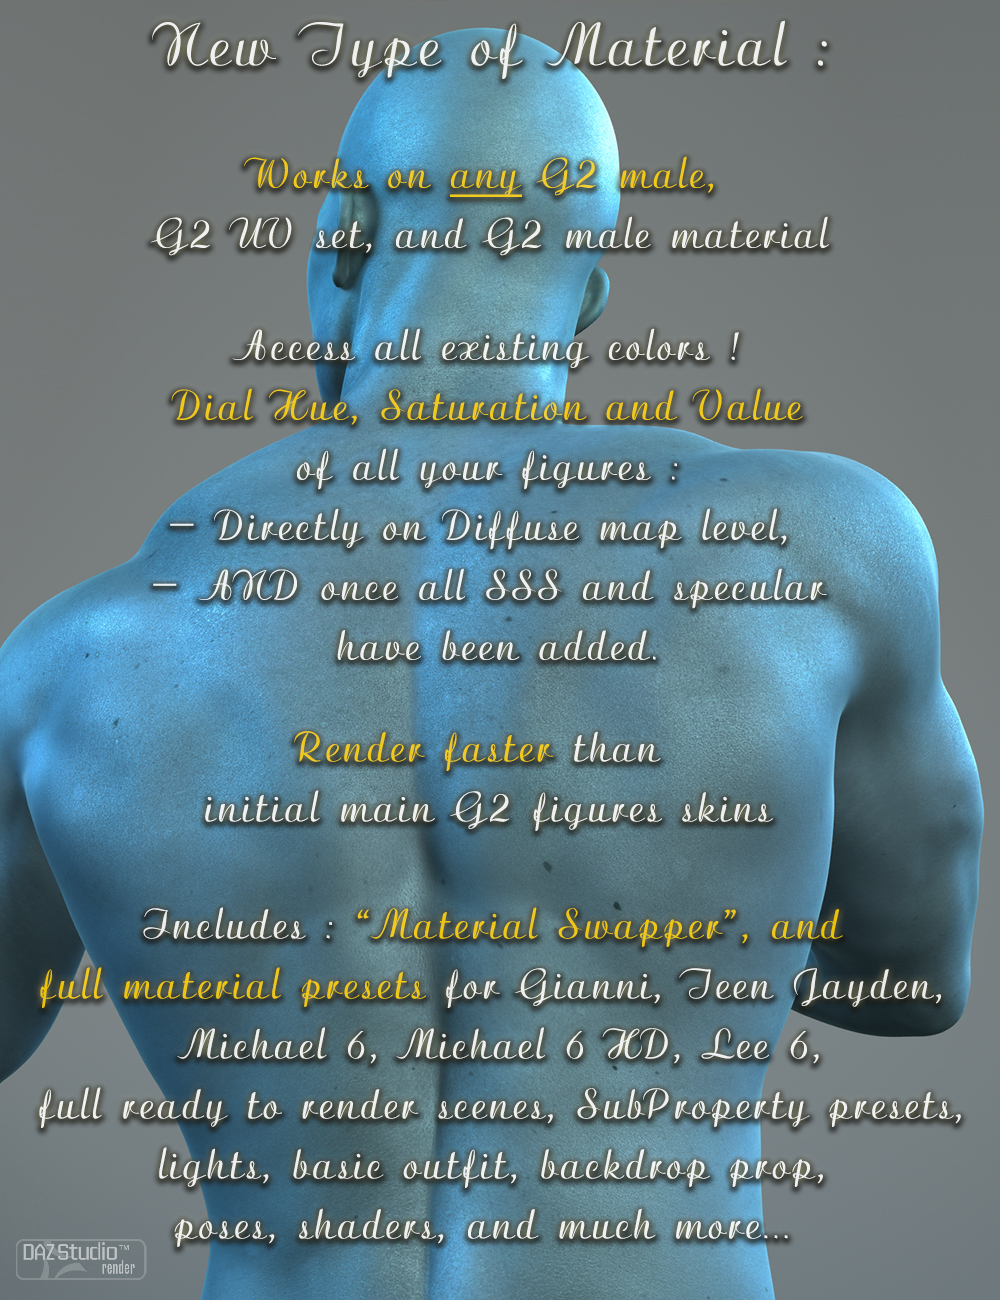 Amazing Skins For Genesis 2 Male(s) by: V3Digitimes, 3D Models by Daz 3D